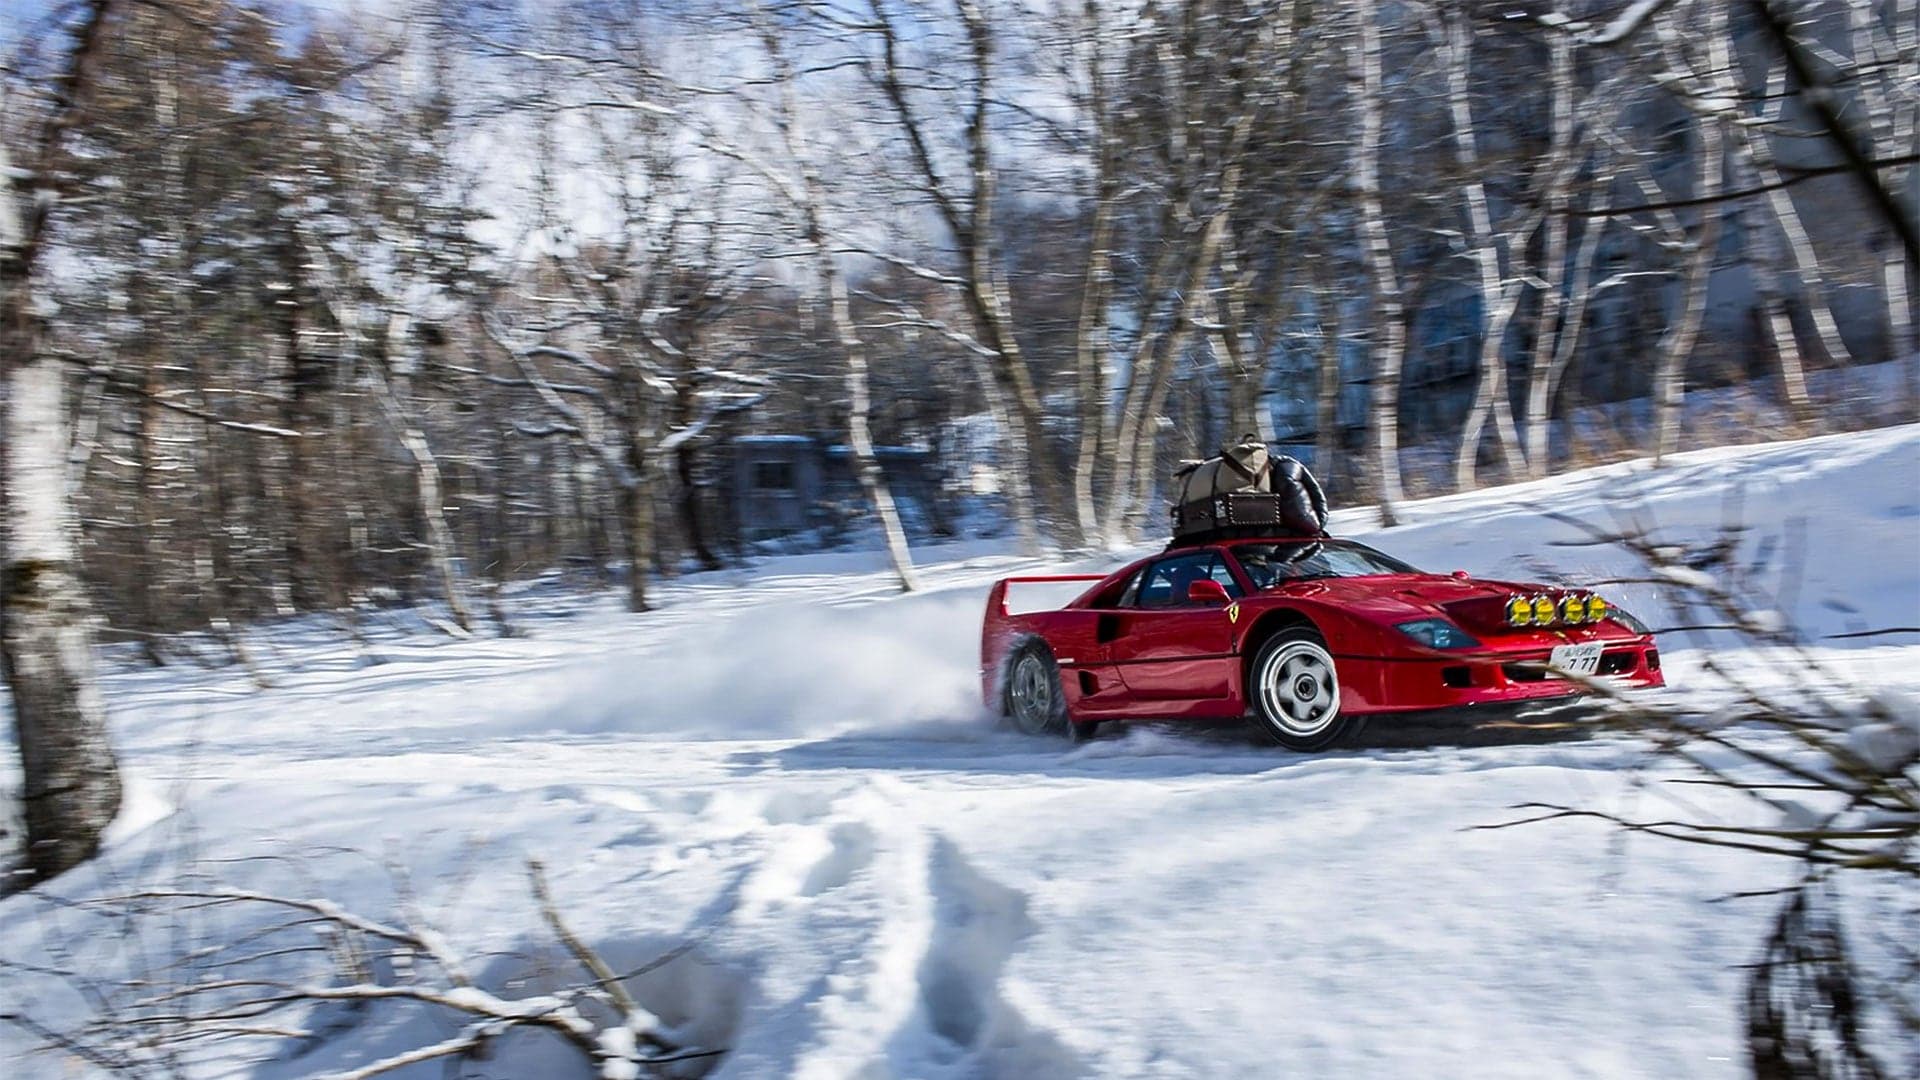 Watch This Ferrari F40 Rallying Up a Ski Slope in Glorious Fashion